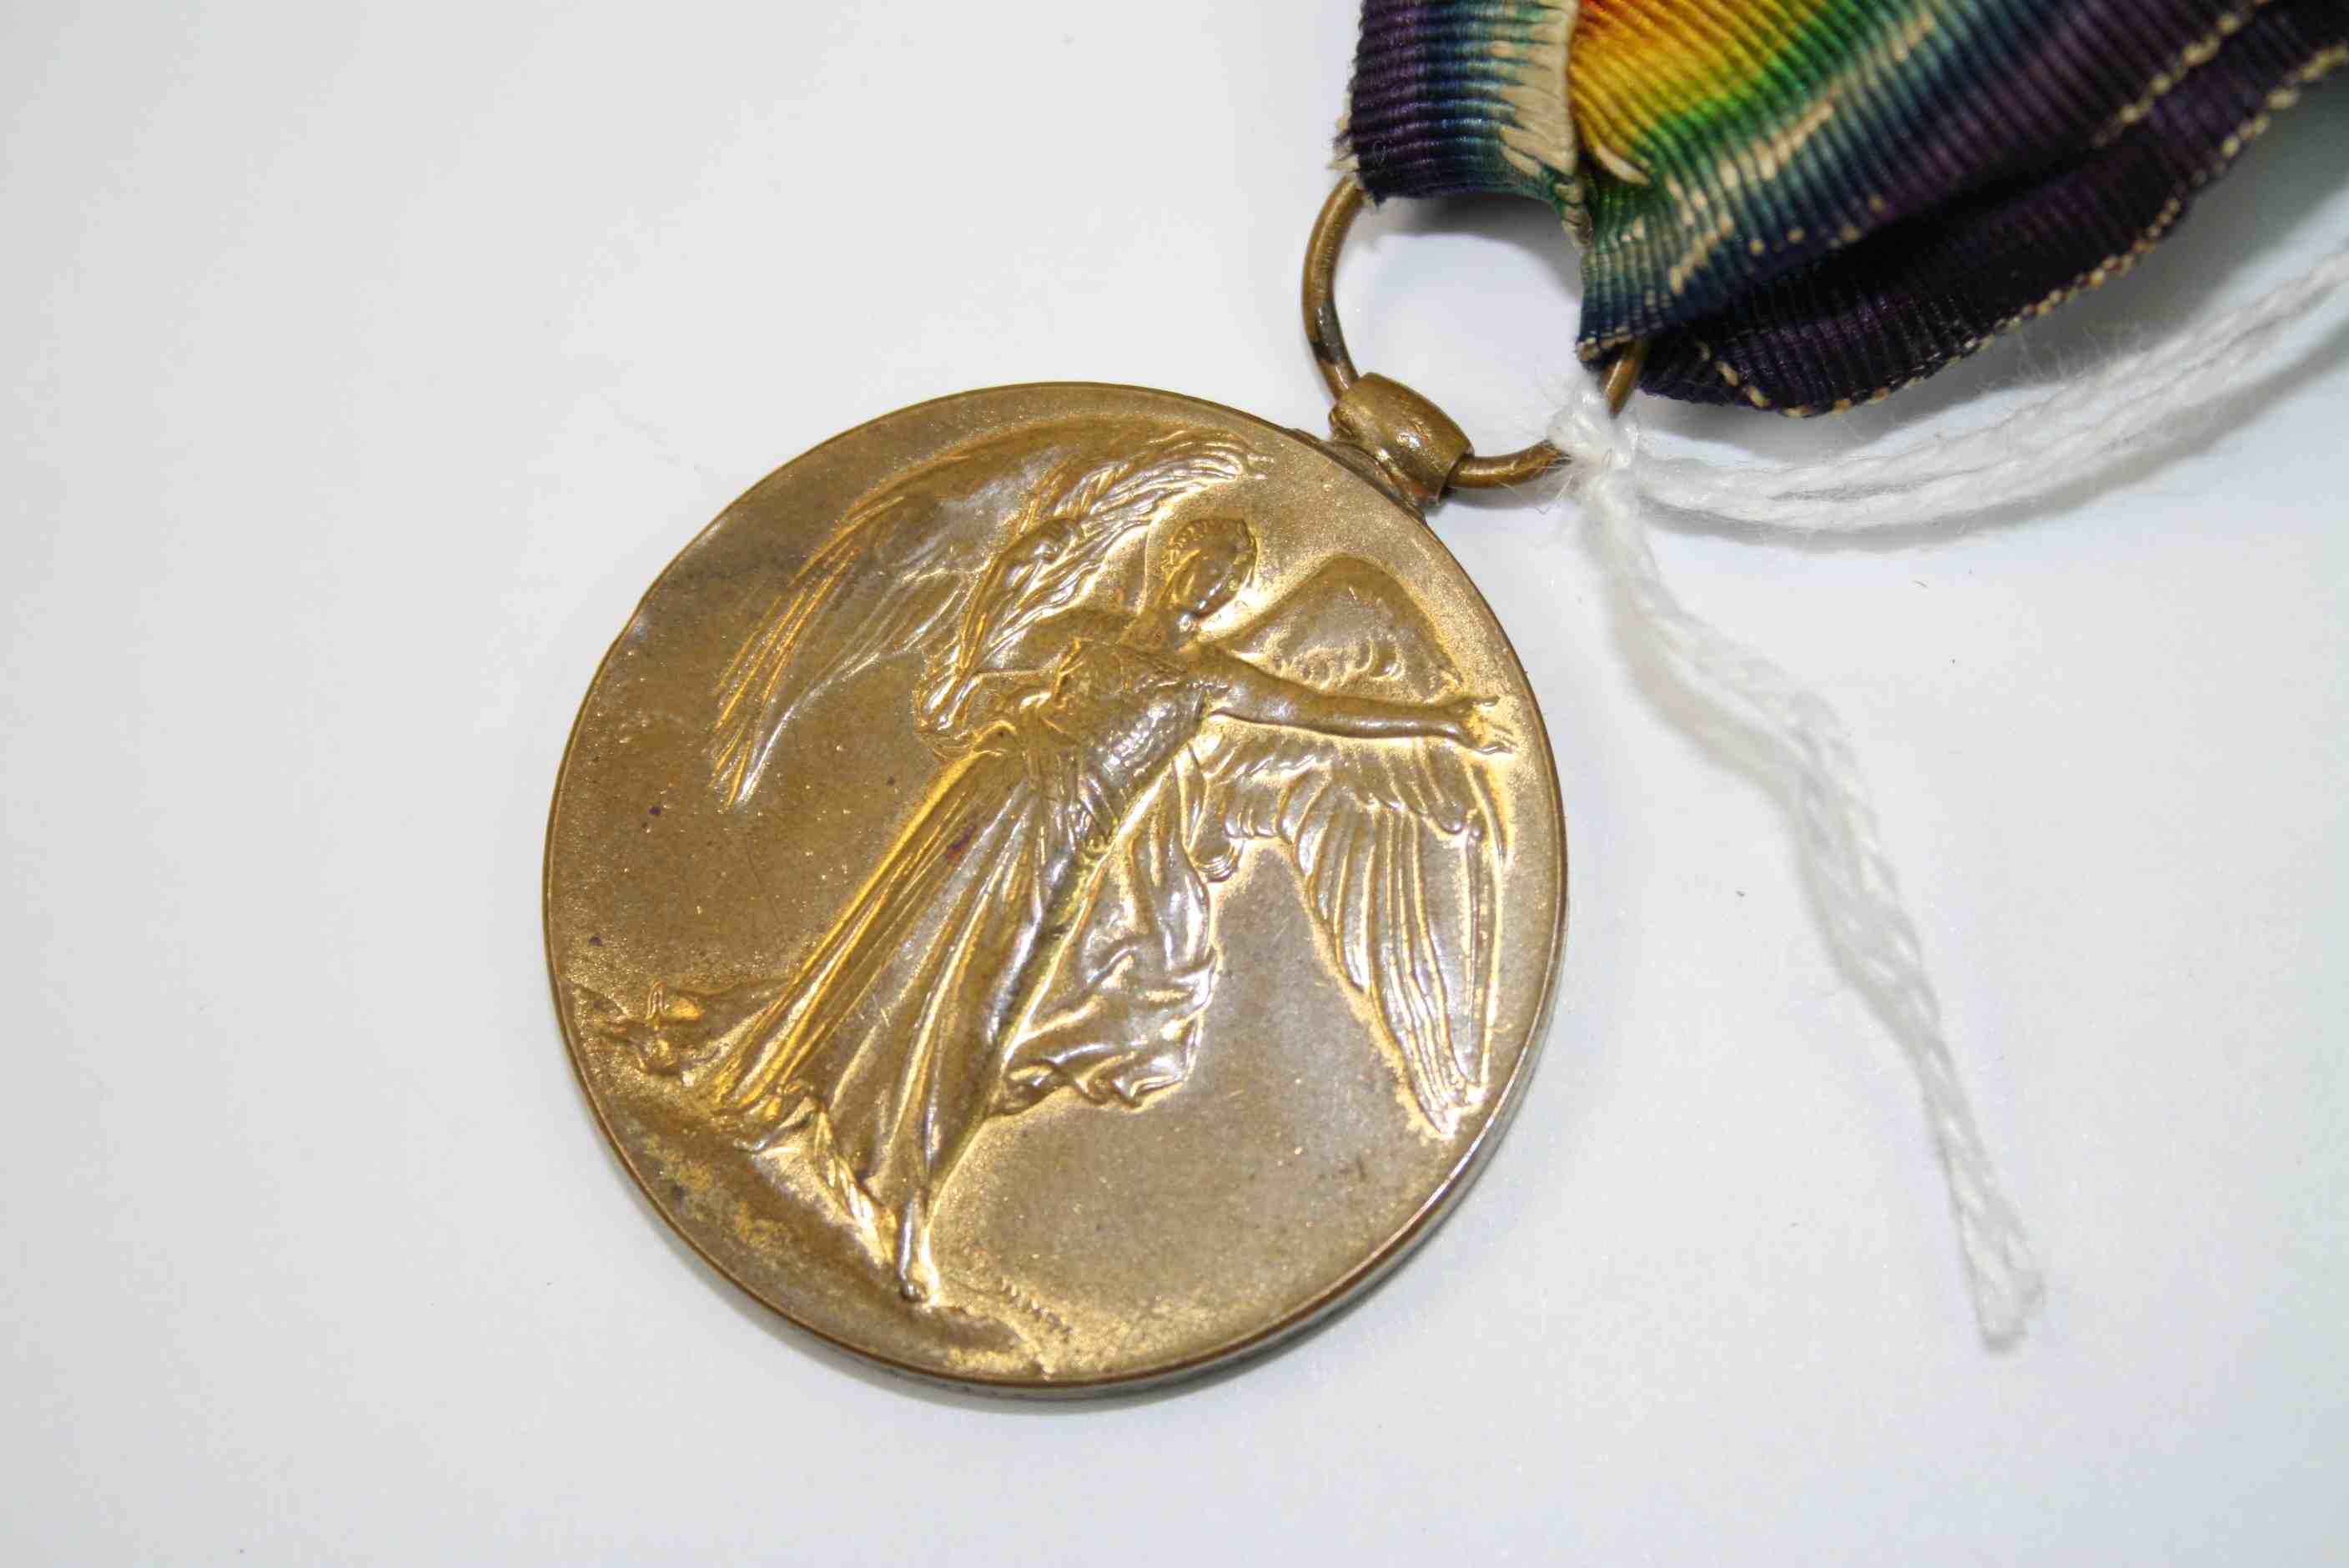 A Full Size British World War One / WW1 Victory Medal With Original Ribbon Issued To 23608 PTE W. - Image 3 of 4